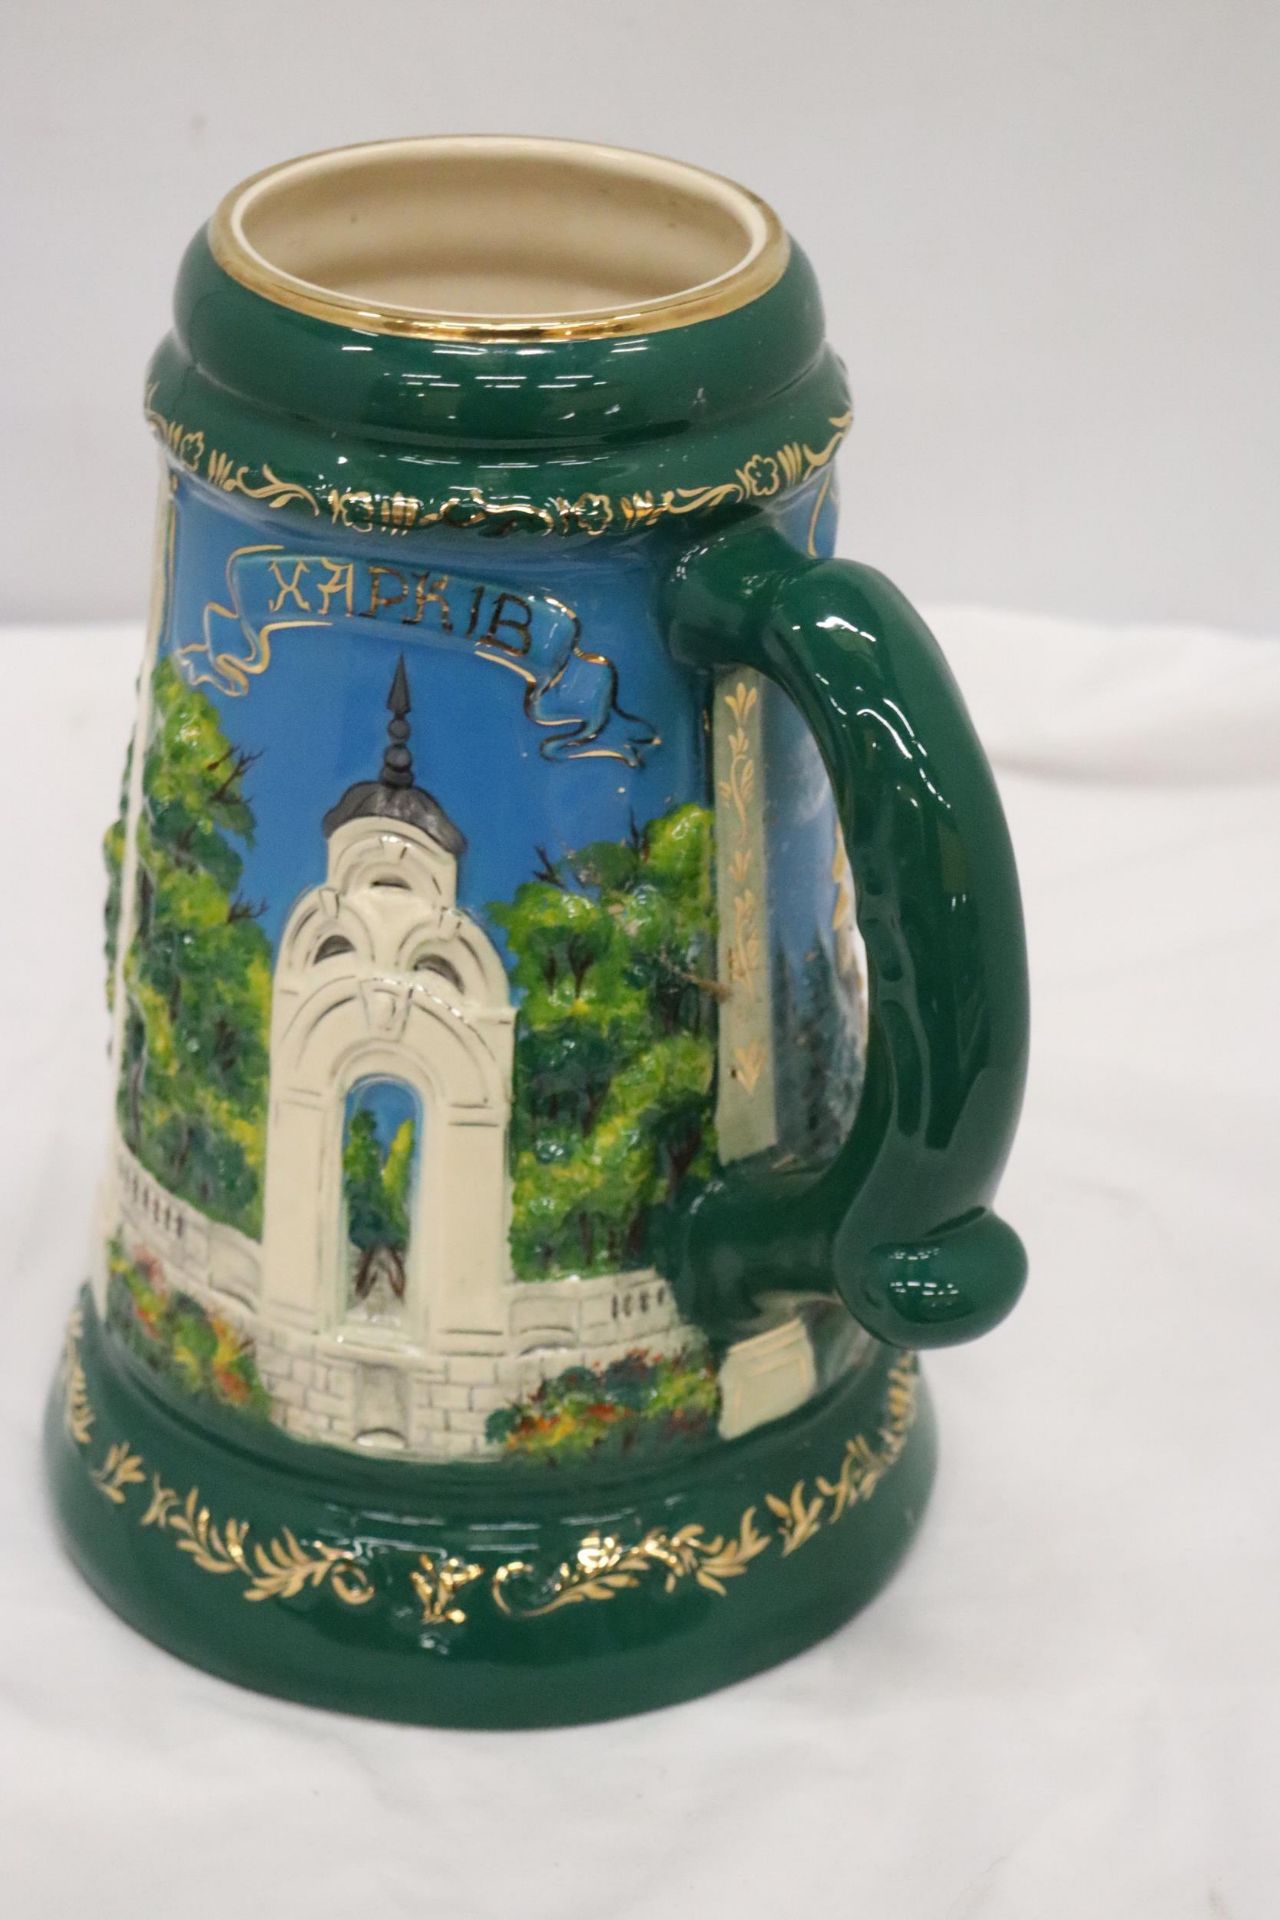 A LARGE TANKARD WITH EMBOSSED DECORATION, MADE IN THE UKRAINE, HEIGHT 28CM - Image 5 of 7